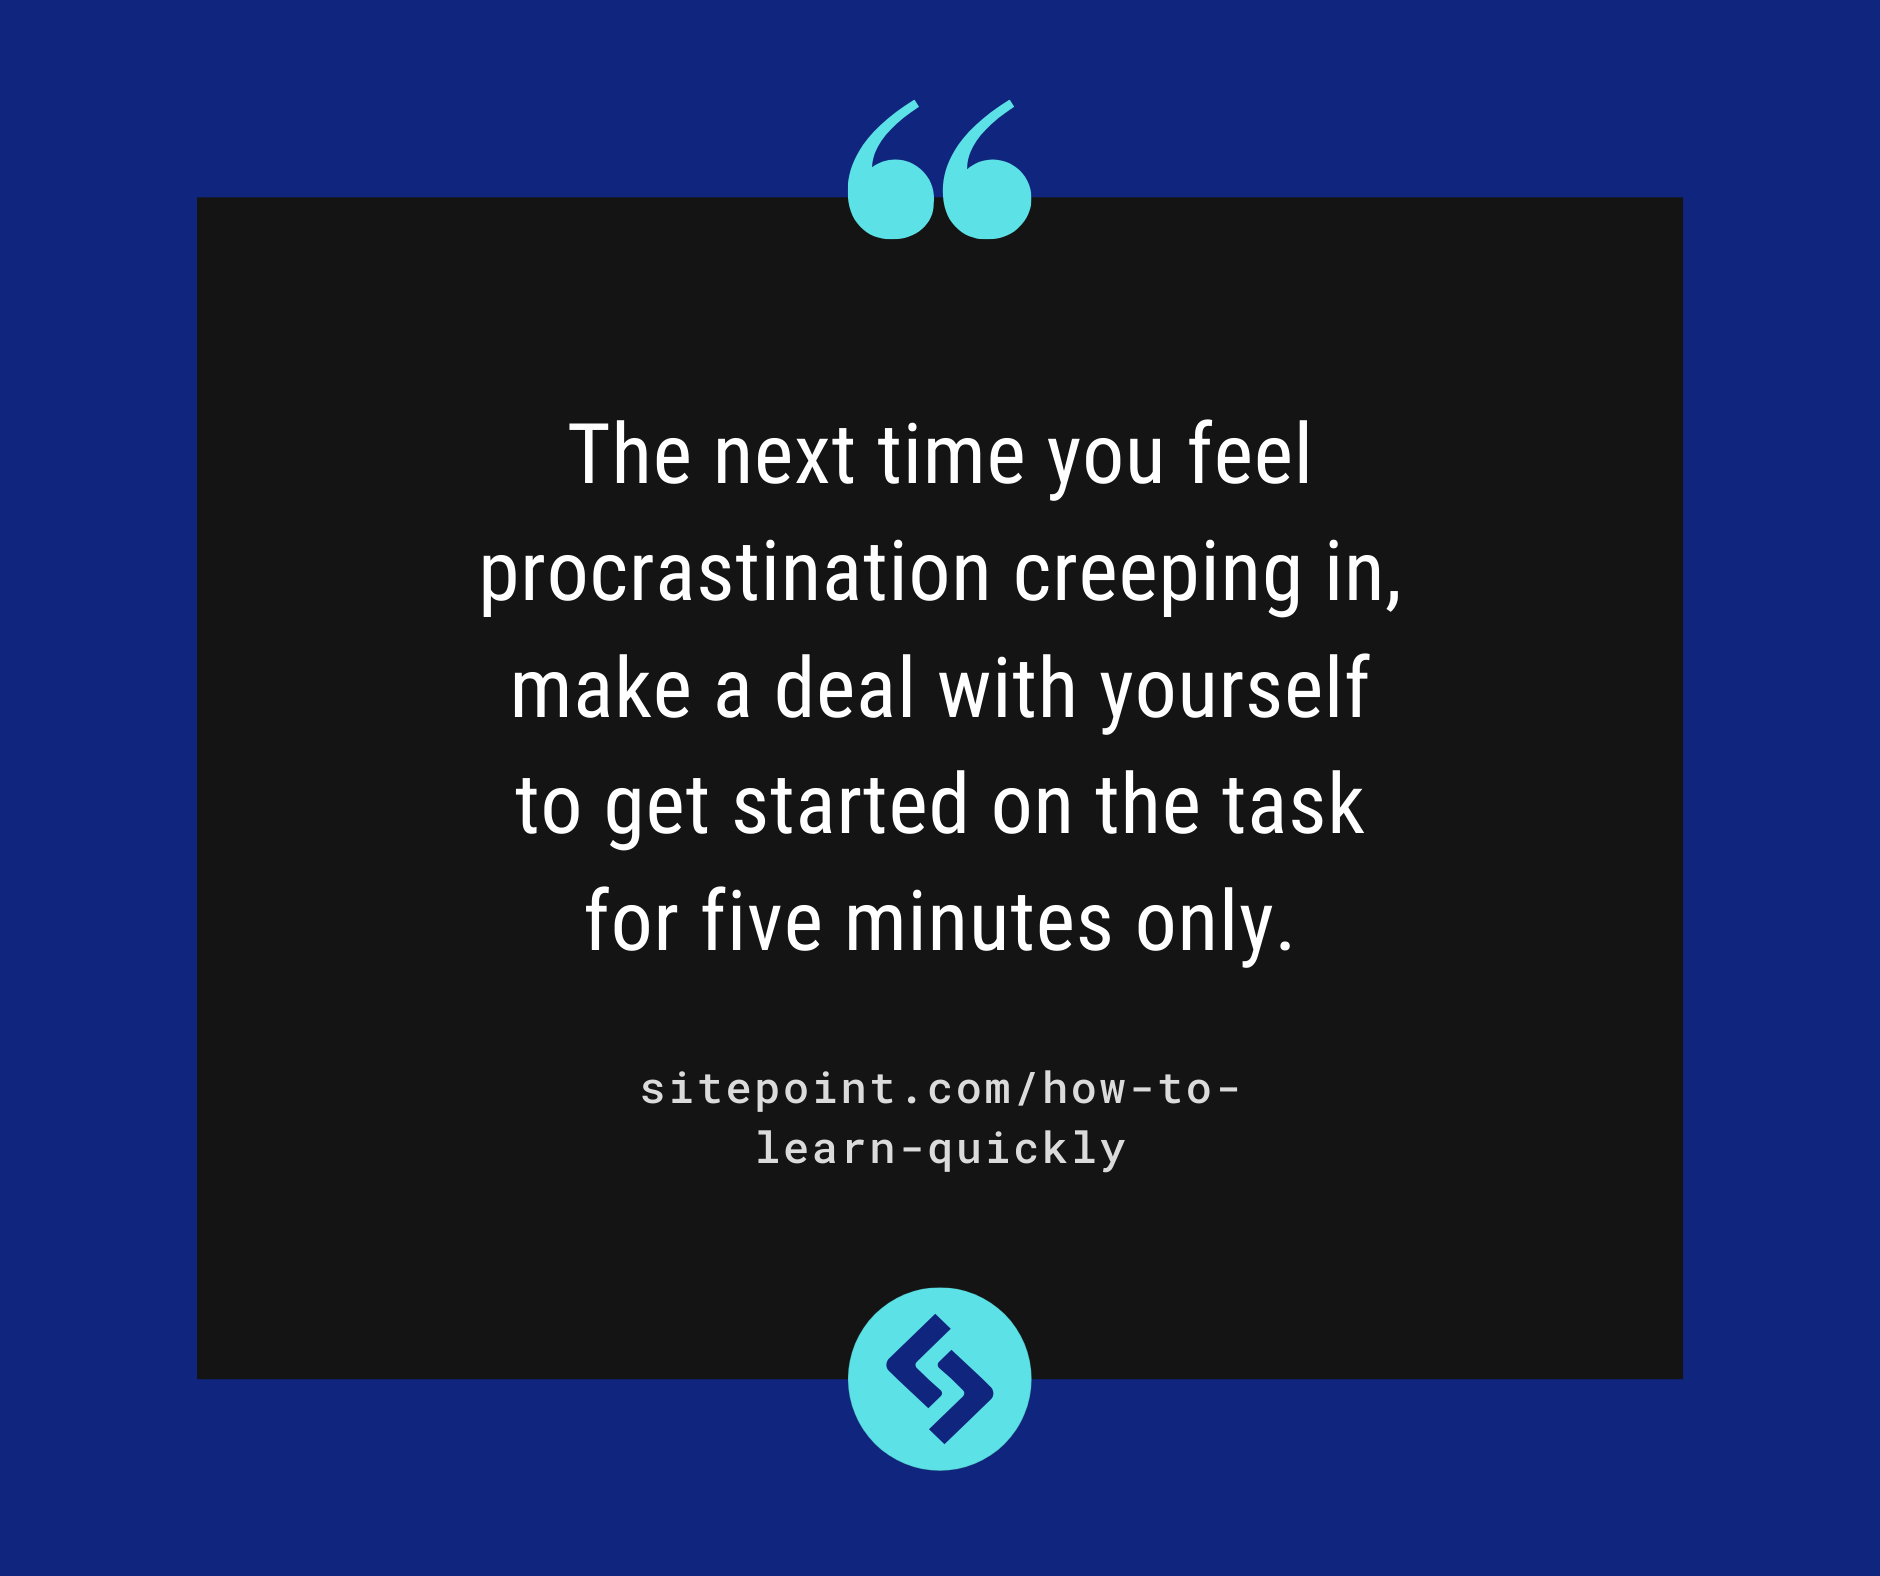 The next time you feel procrastination creeping in, make a deal with yourself to get started on the task for five minutes only.